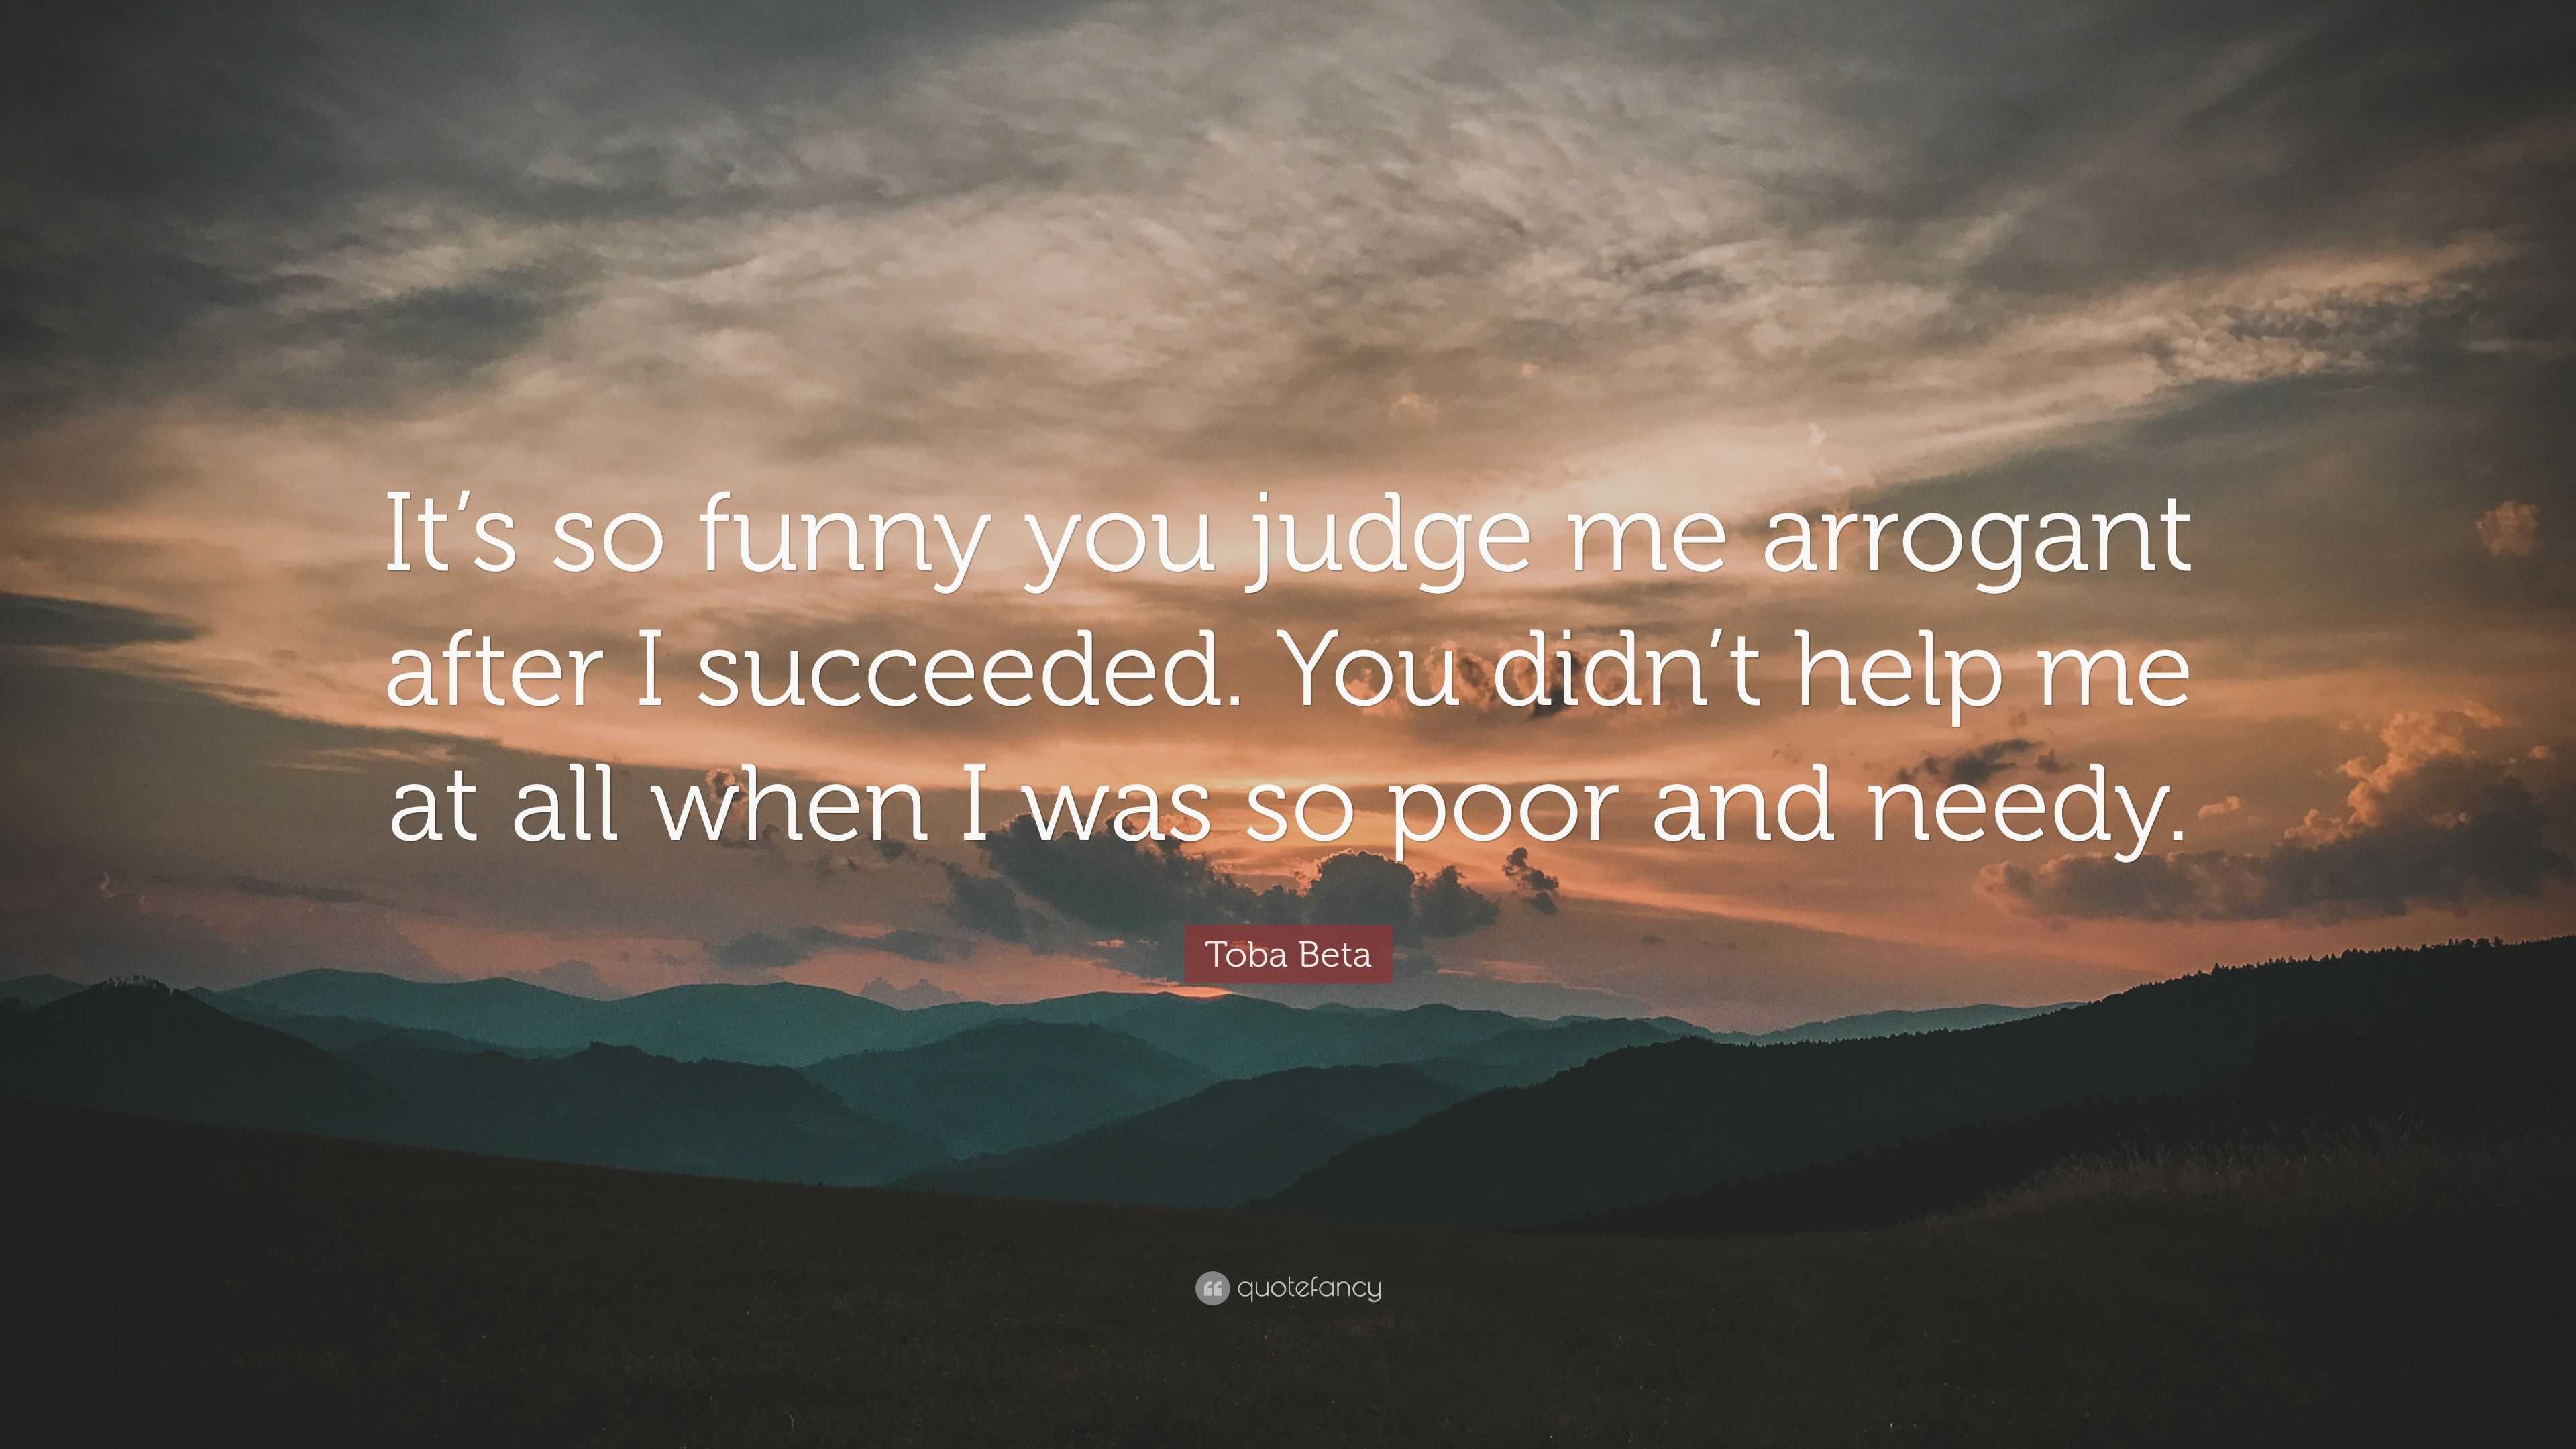 Toba Beta Quote: “It's so funny you judge me arrogant after I succeeded.  You didn't